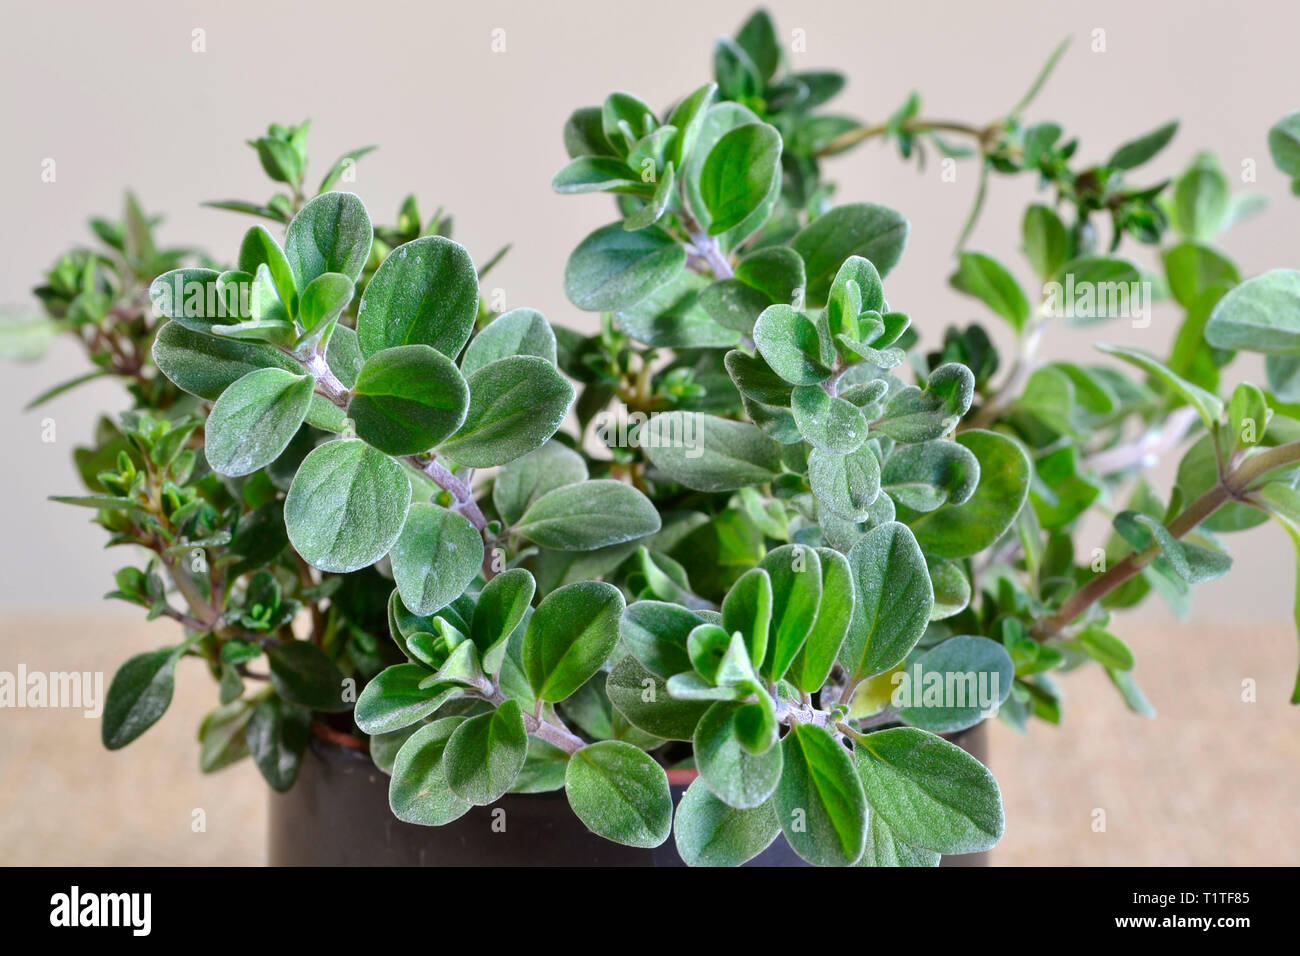 Thyme is any member of the genus Thymus of aromatic perennial evergreen herbs. Stock Photo